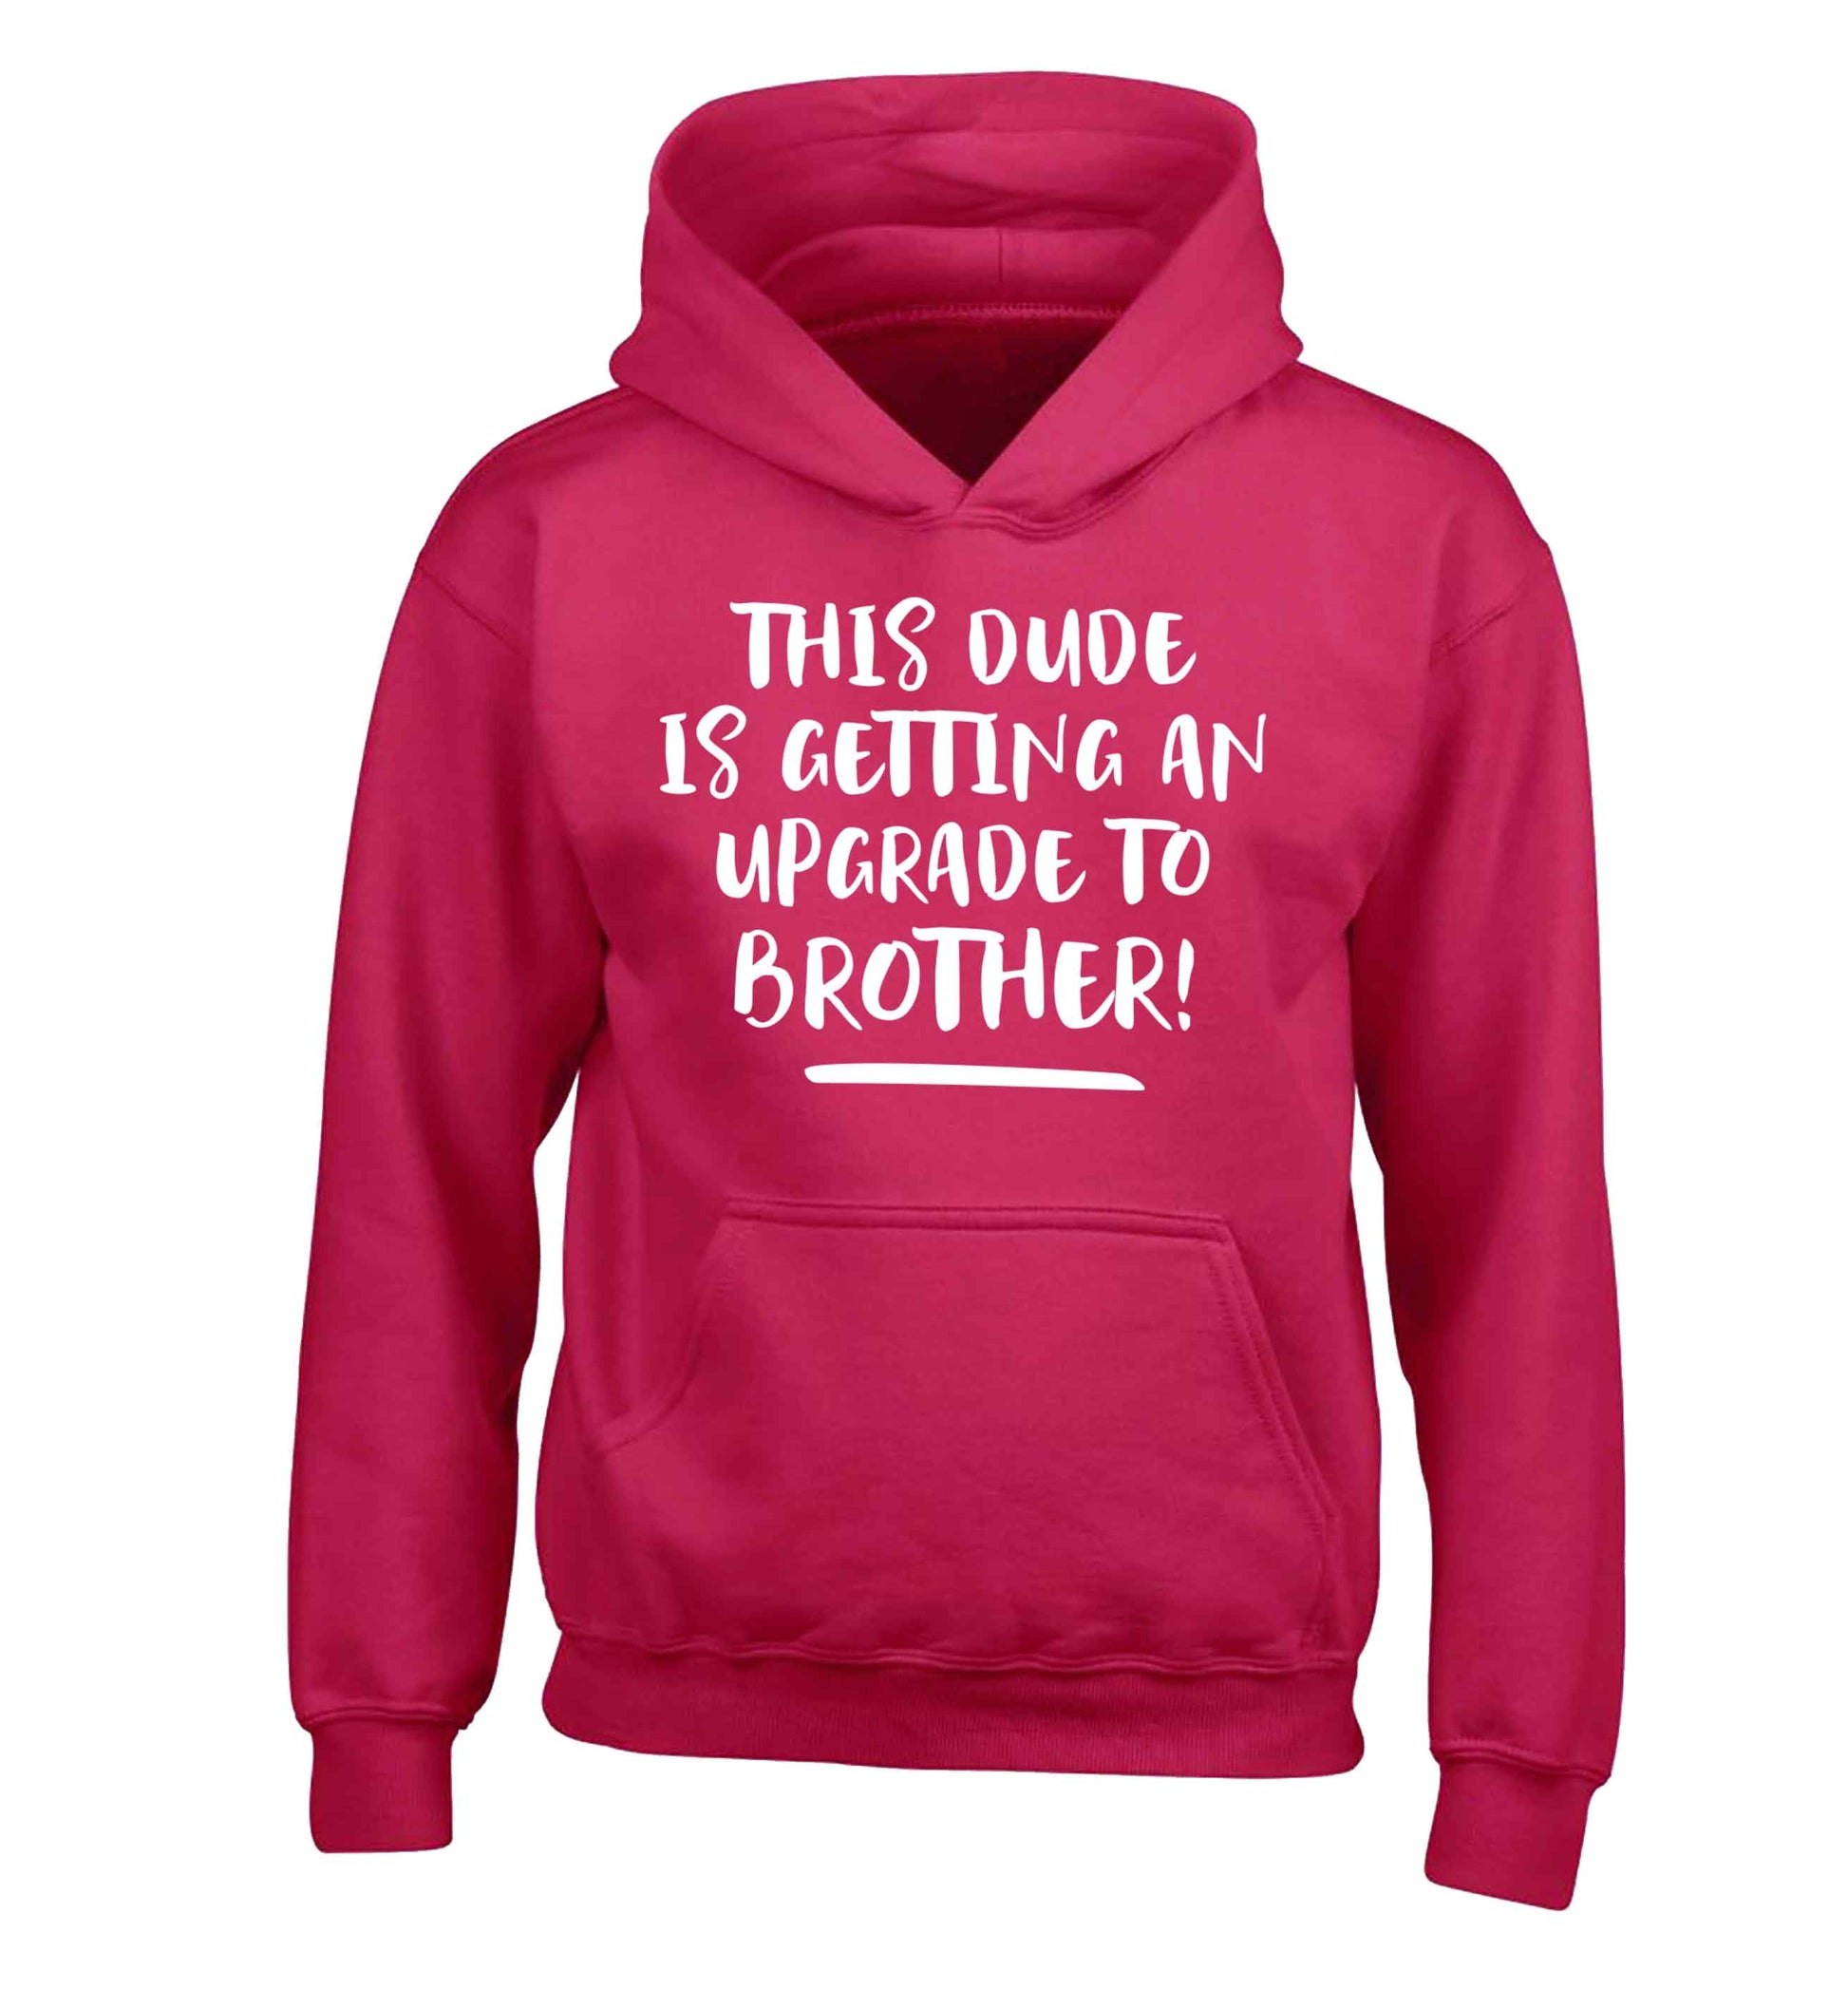 This dude is getting an upgrade to brother! children's pink hoodie 12-13 Years